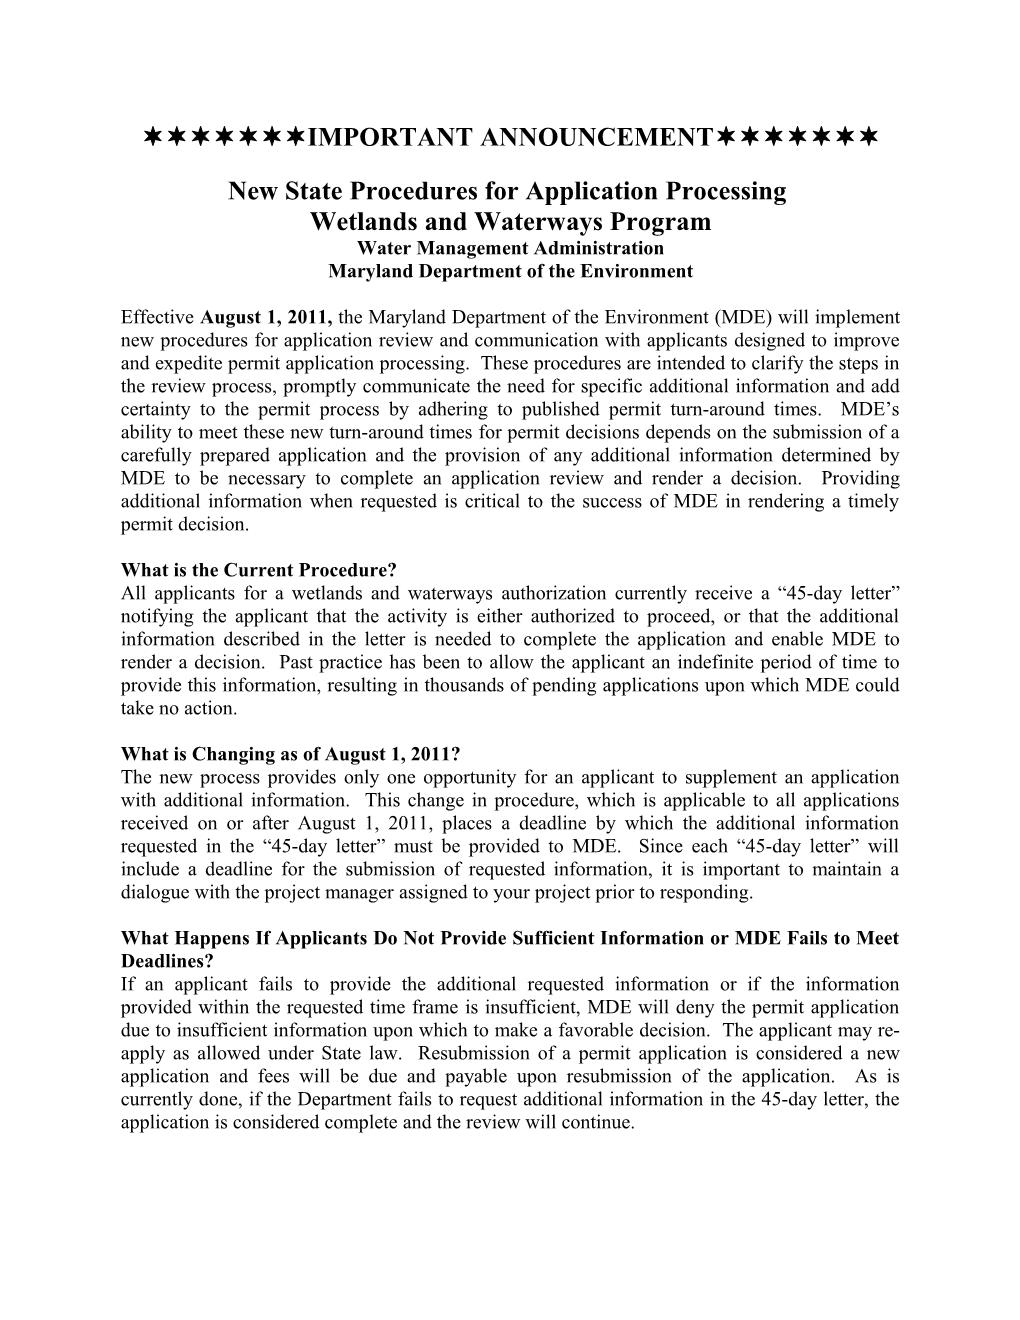 New State Procedures for Application Processing